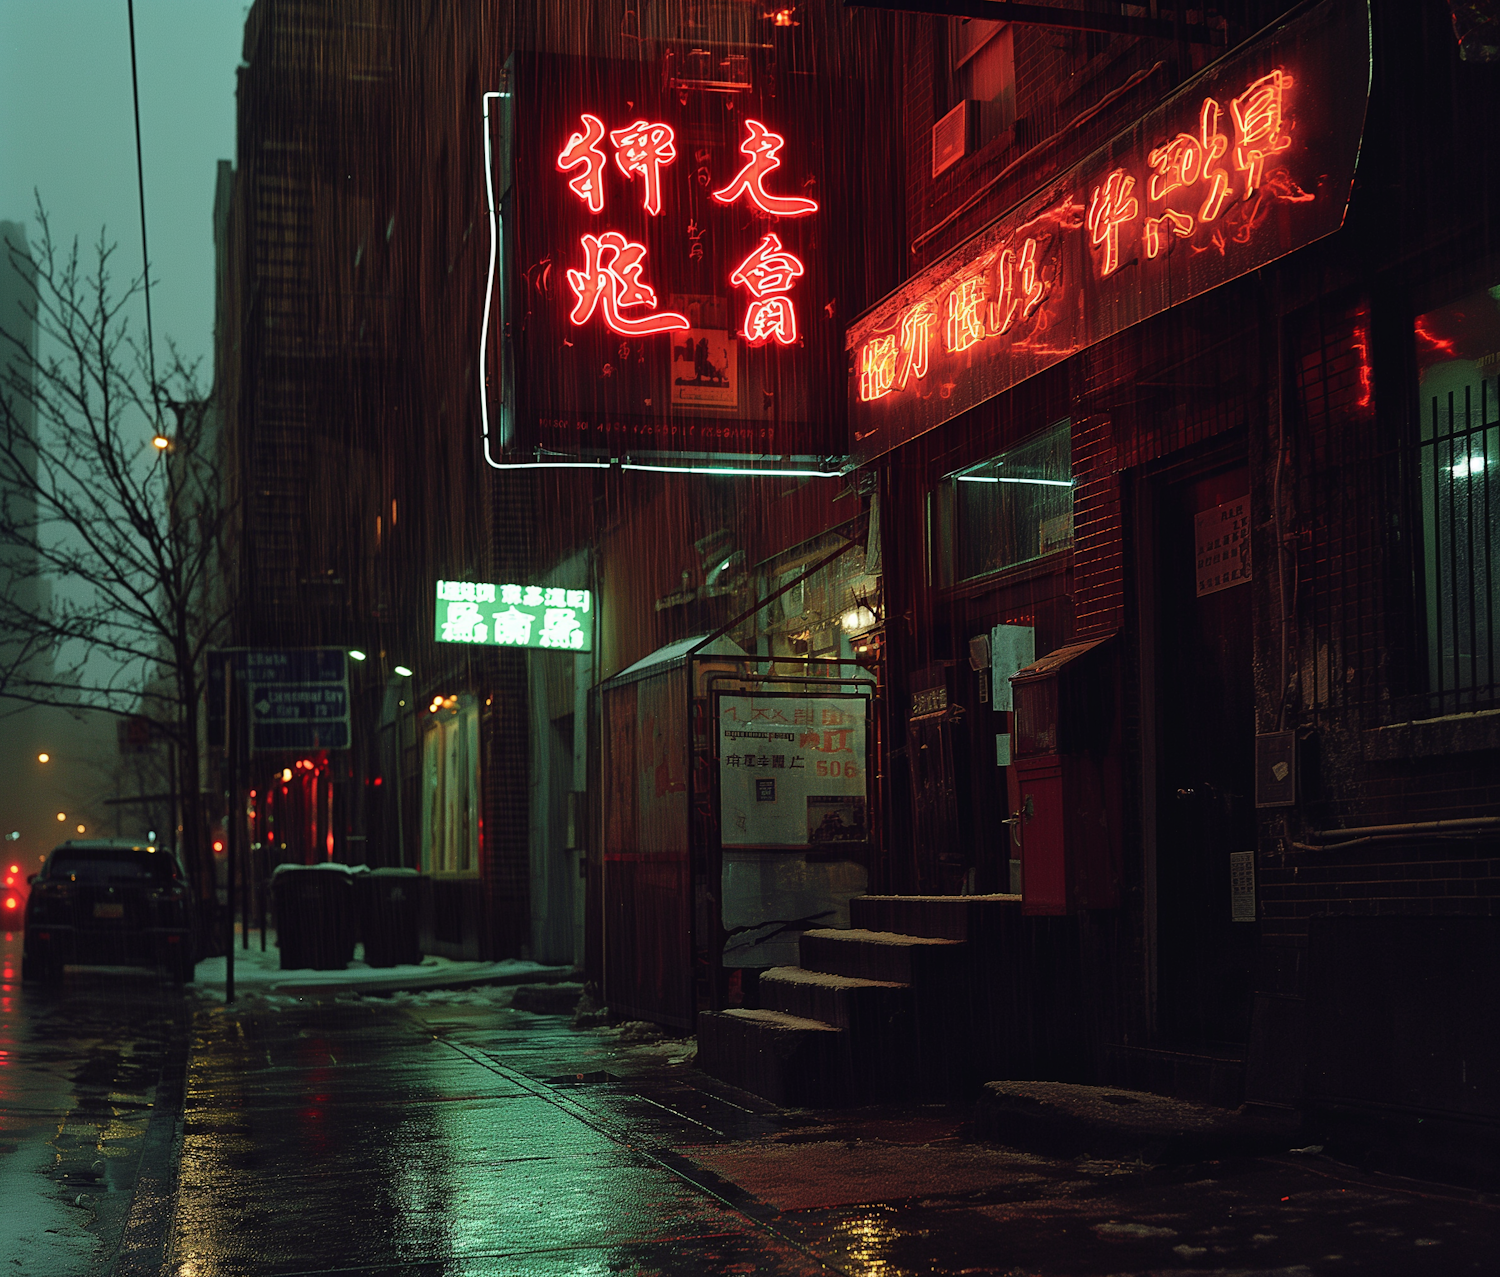 Moody Chinatown Nightscape with Neon Signs